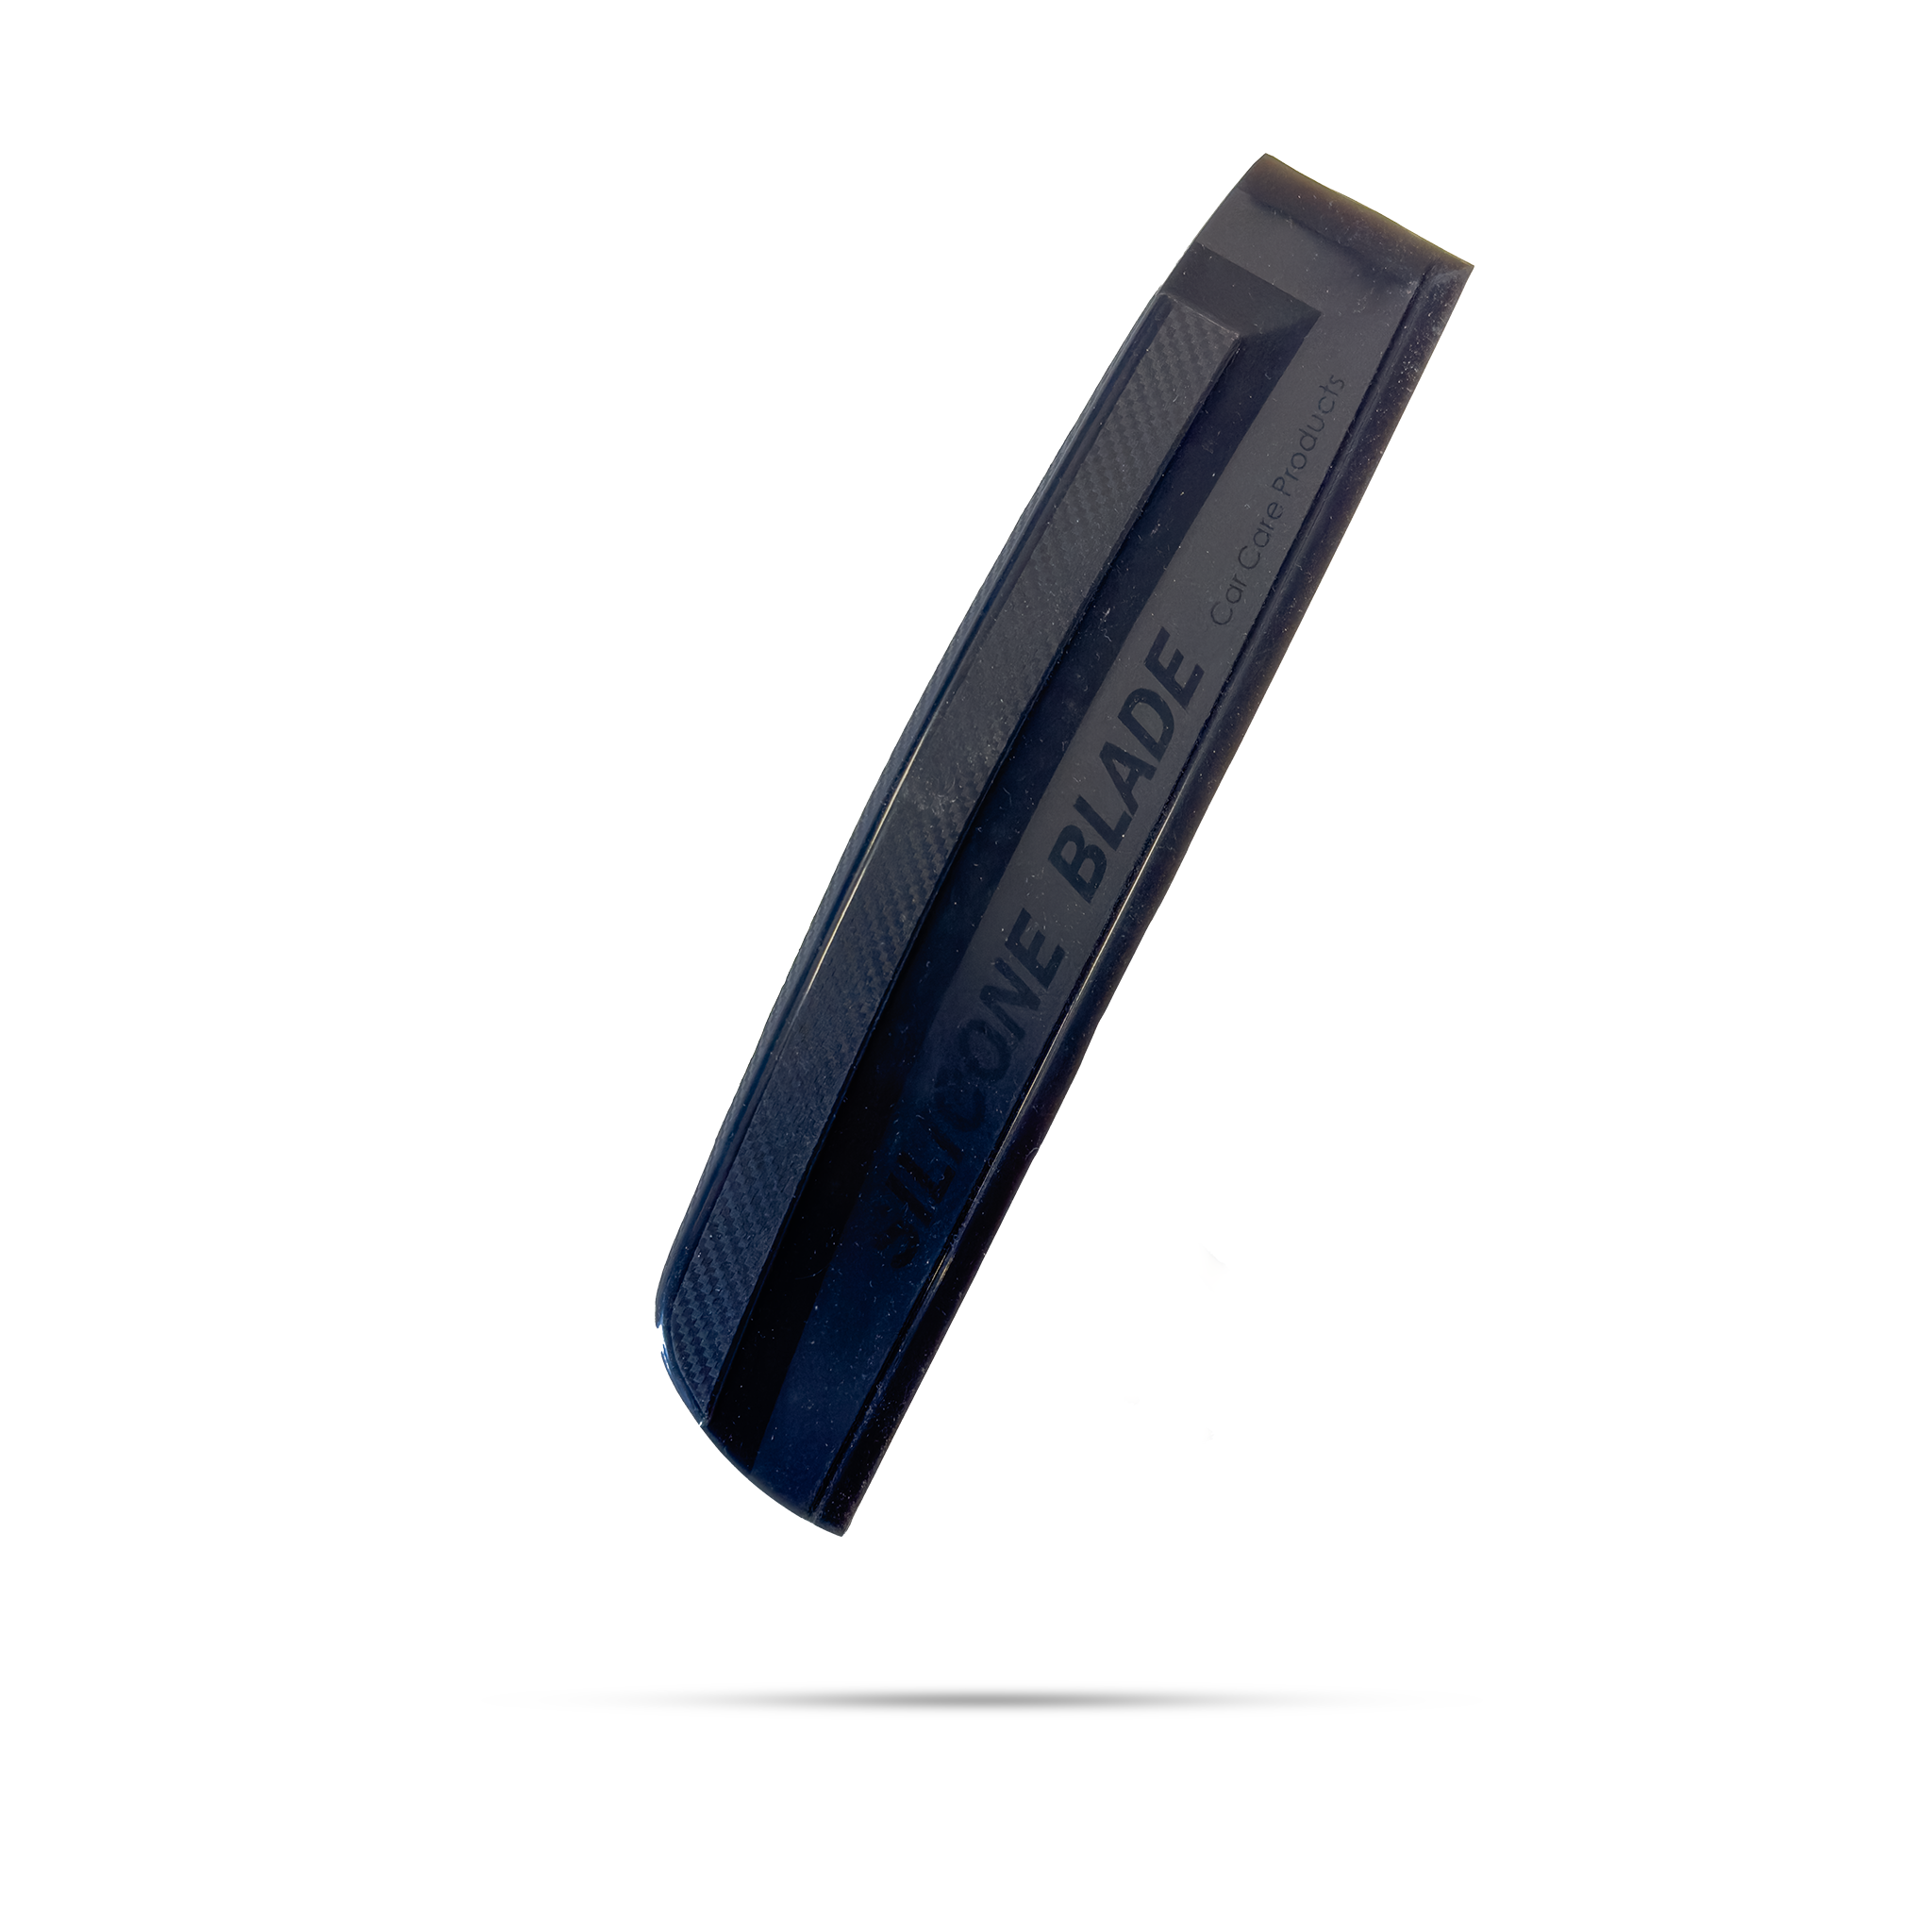 Silicone squeegee